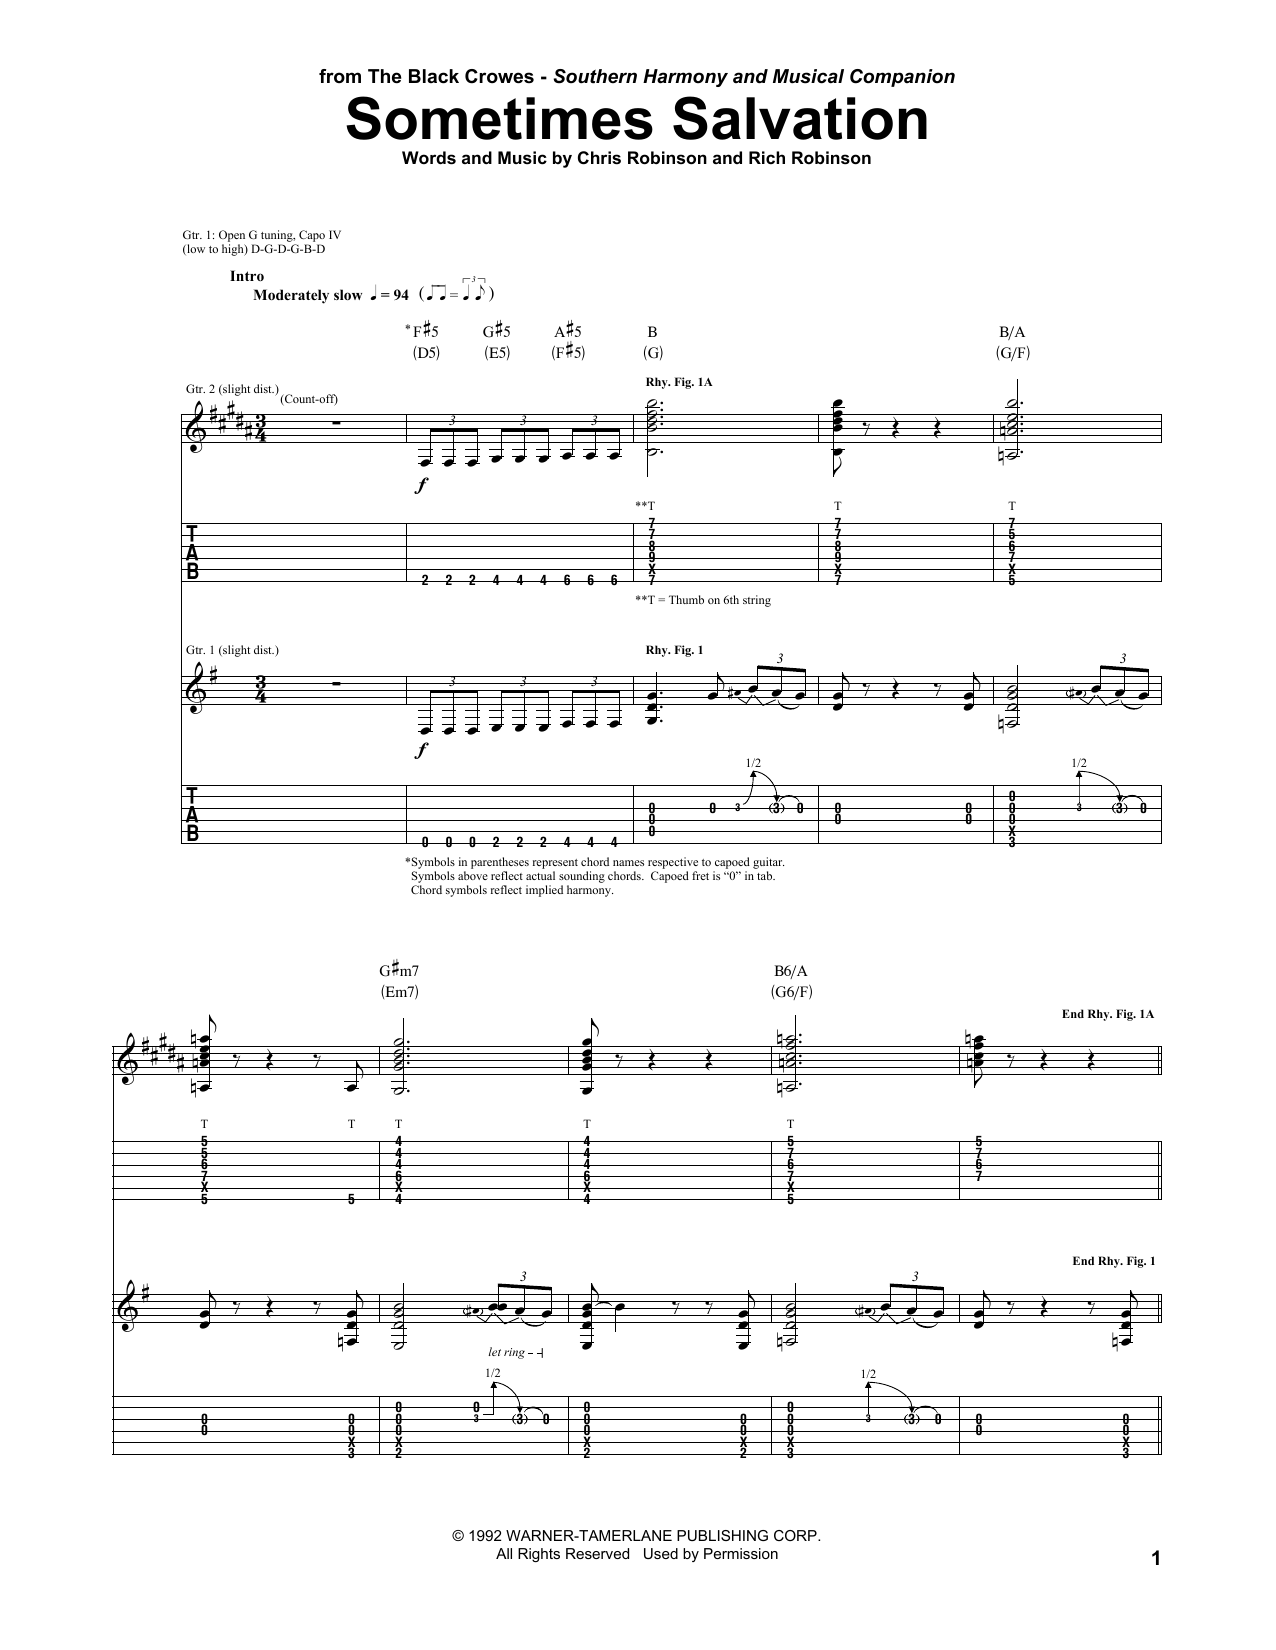 Download The Black Crowes Sometimes Salvation Sheet Music